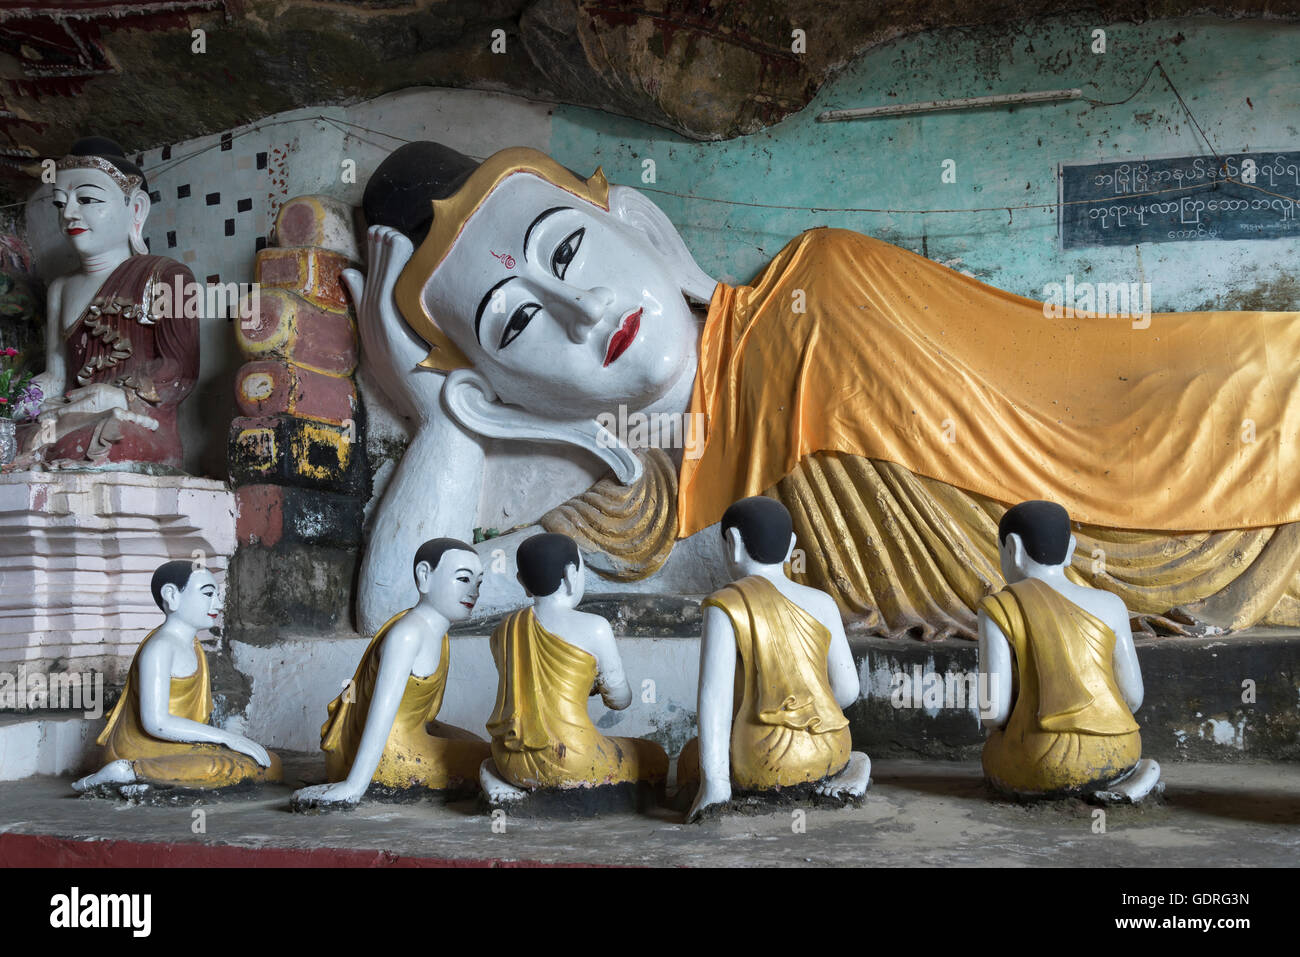 Reclining Buddha at Kaw-goon Cave Temple, Mon State, Myanmar Stock Photo